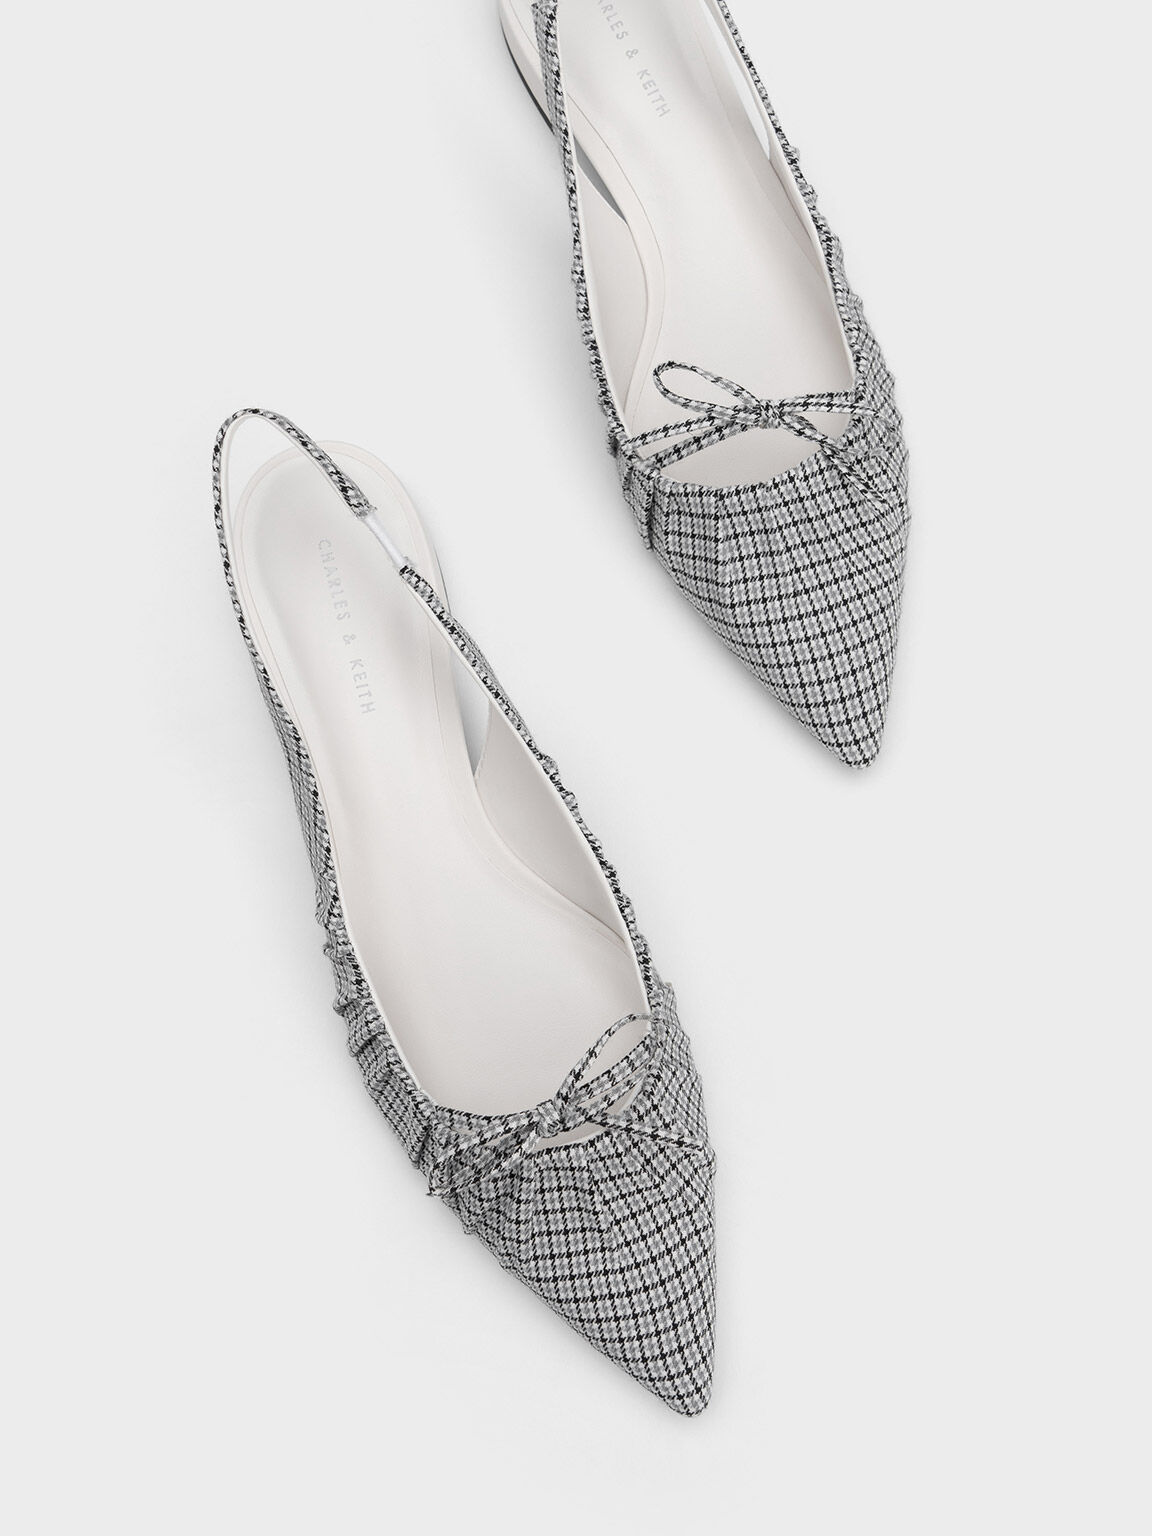 Checkered Bow Ruched Slingback Flats, Multi, hi-res